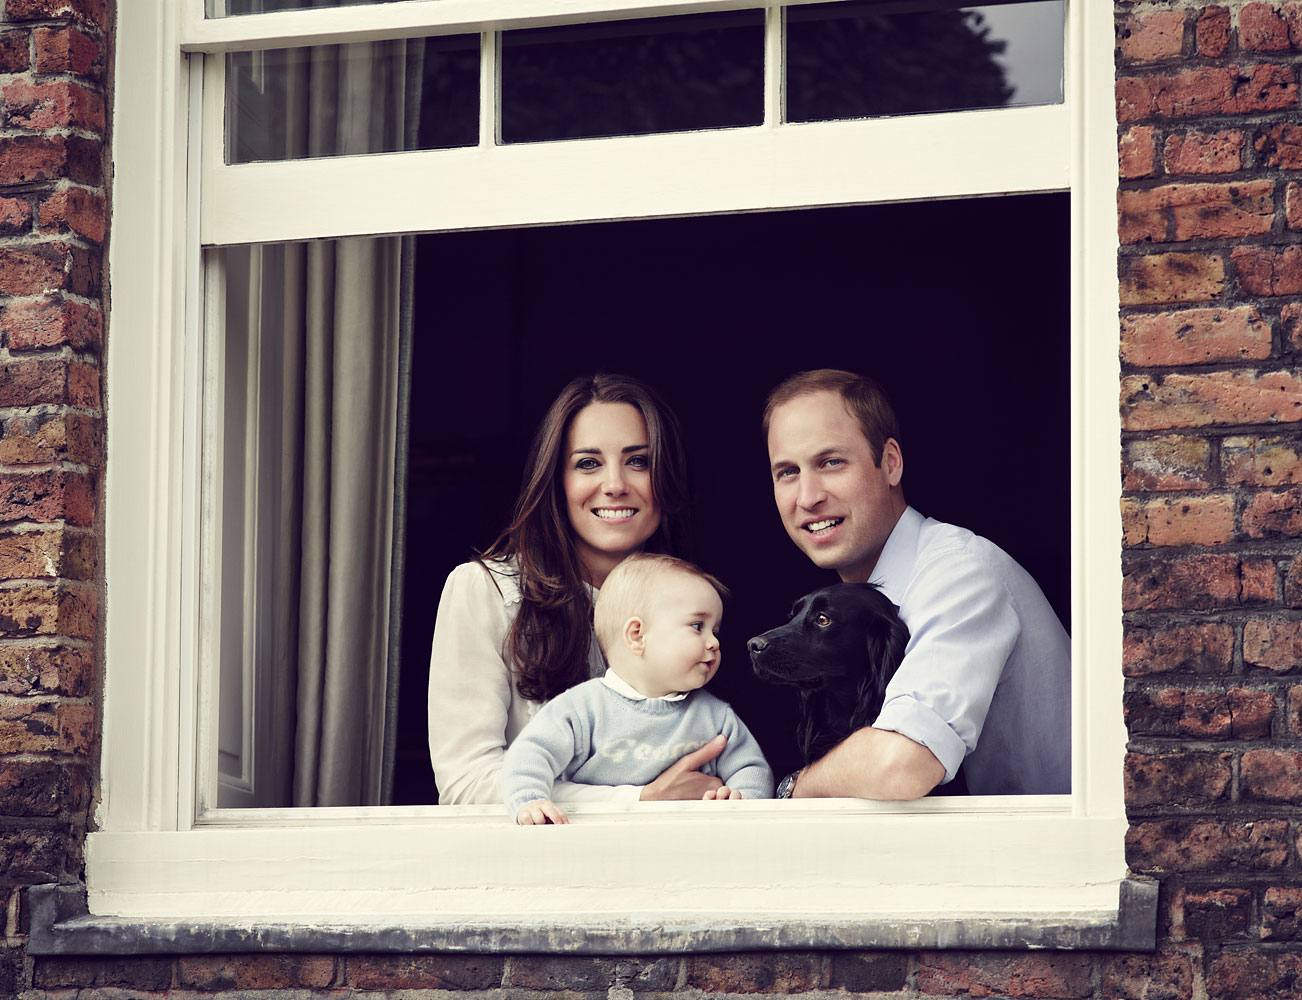 The Duke and Duchess of Cambridge with their son Prince George, photographed at Kensington Palace, March 2014. (Jason Bell—Camera Press/Redux)